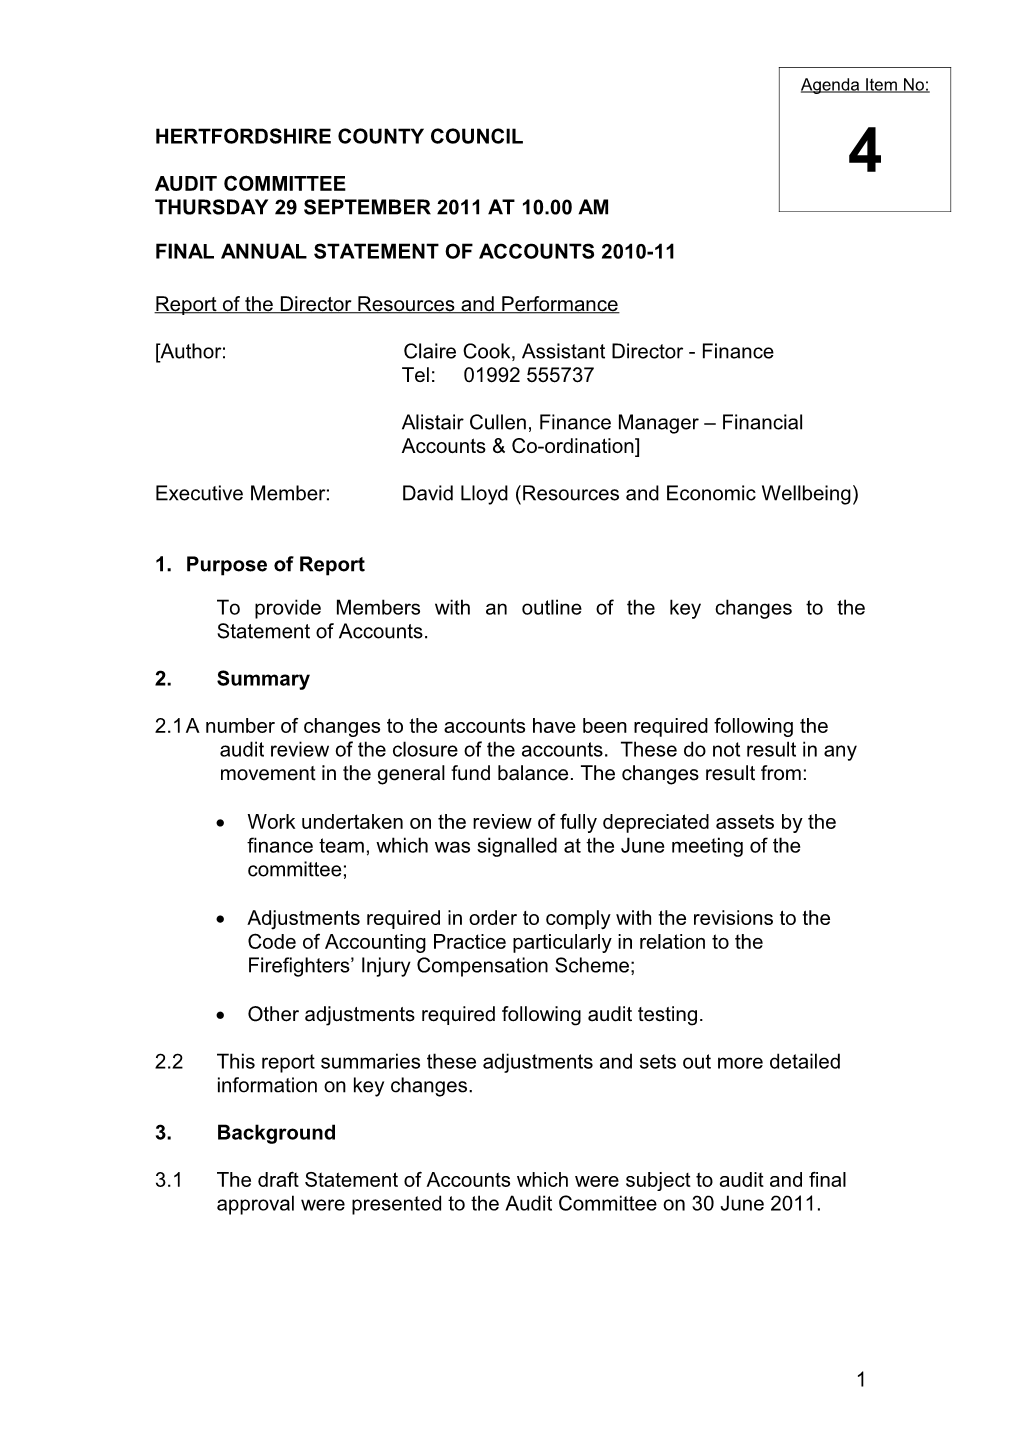 Audit Committee - Thursday 28 October 2010 at 10.00Am Item 2A - Final Annual Statement